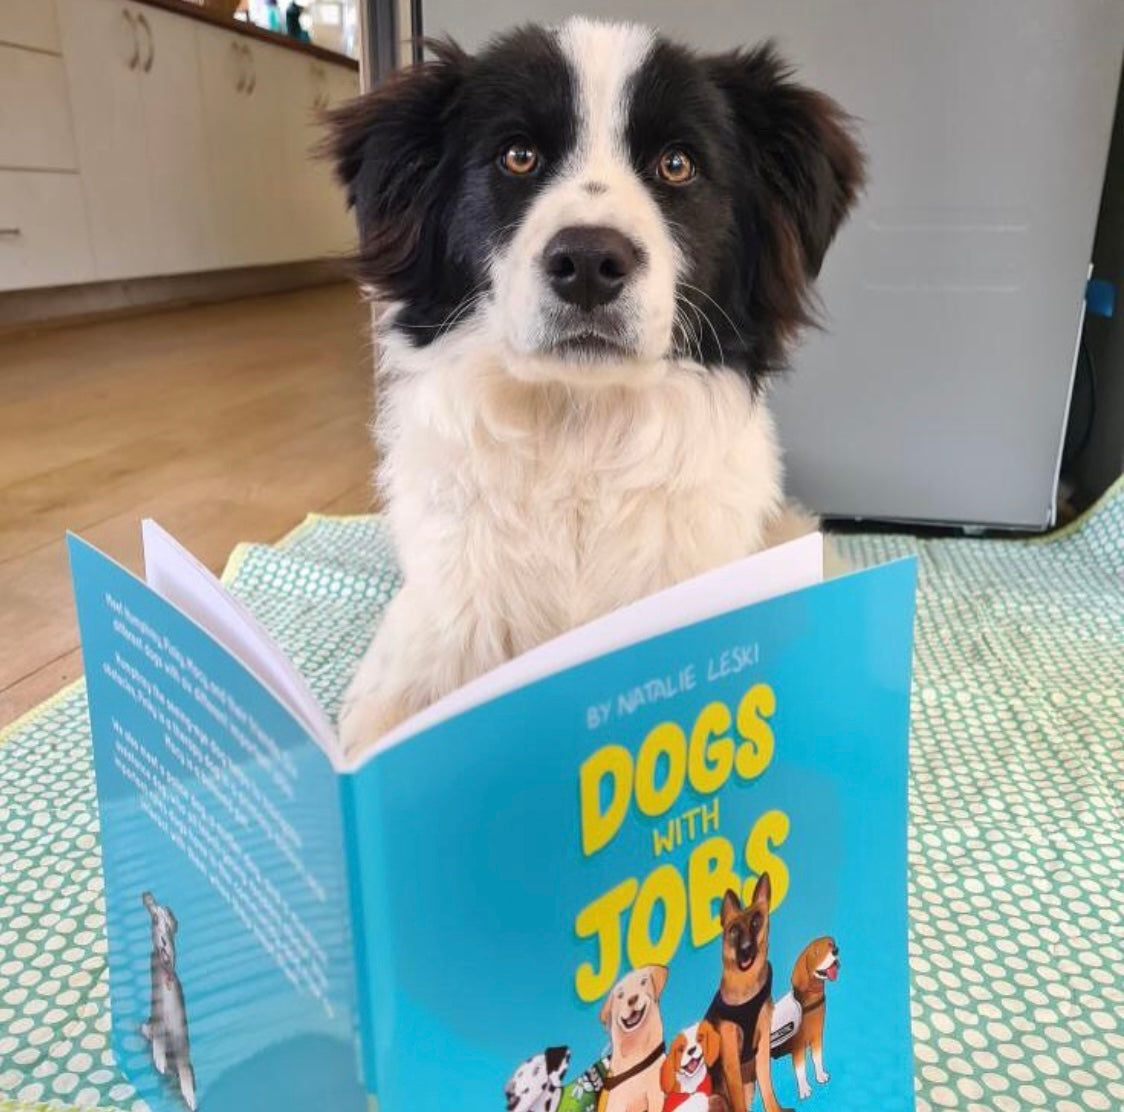 Dogs With Jobs Book